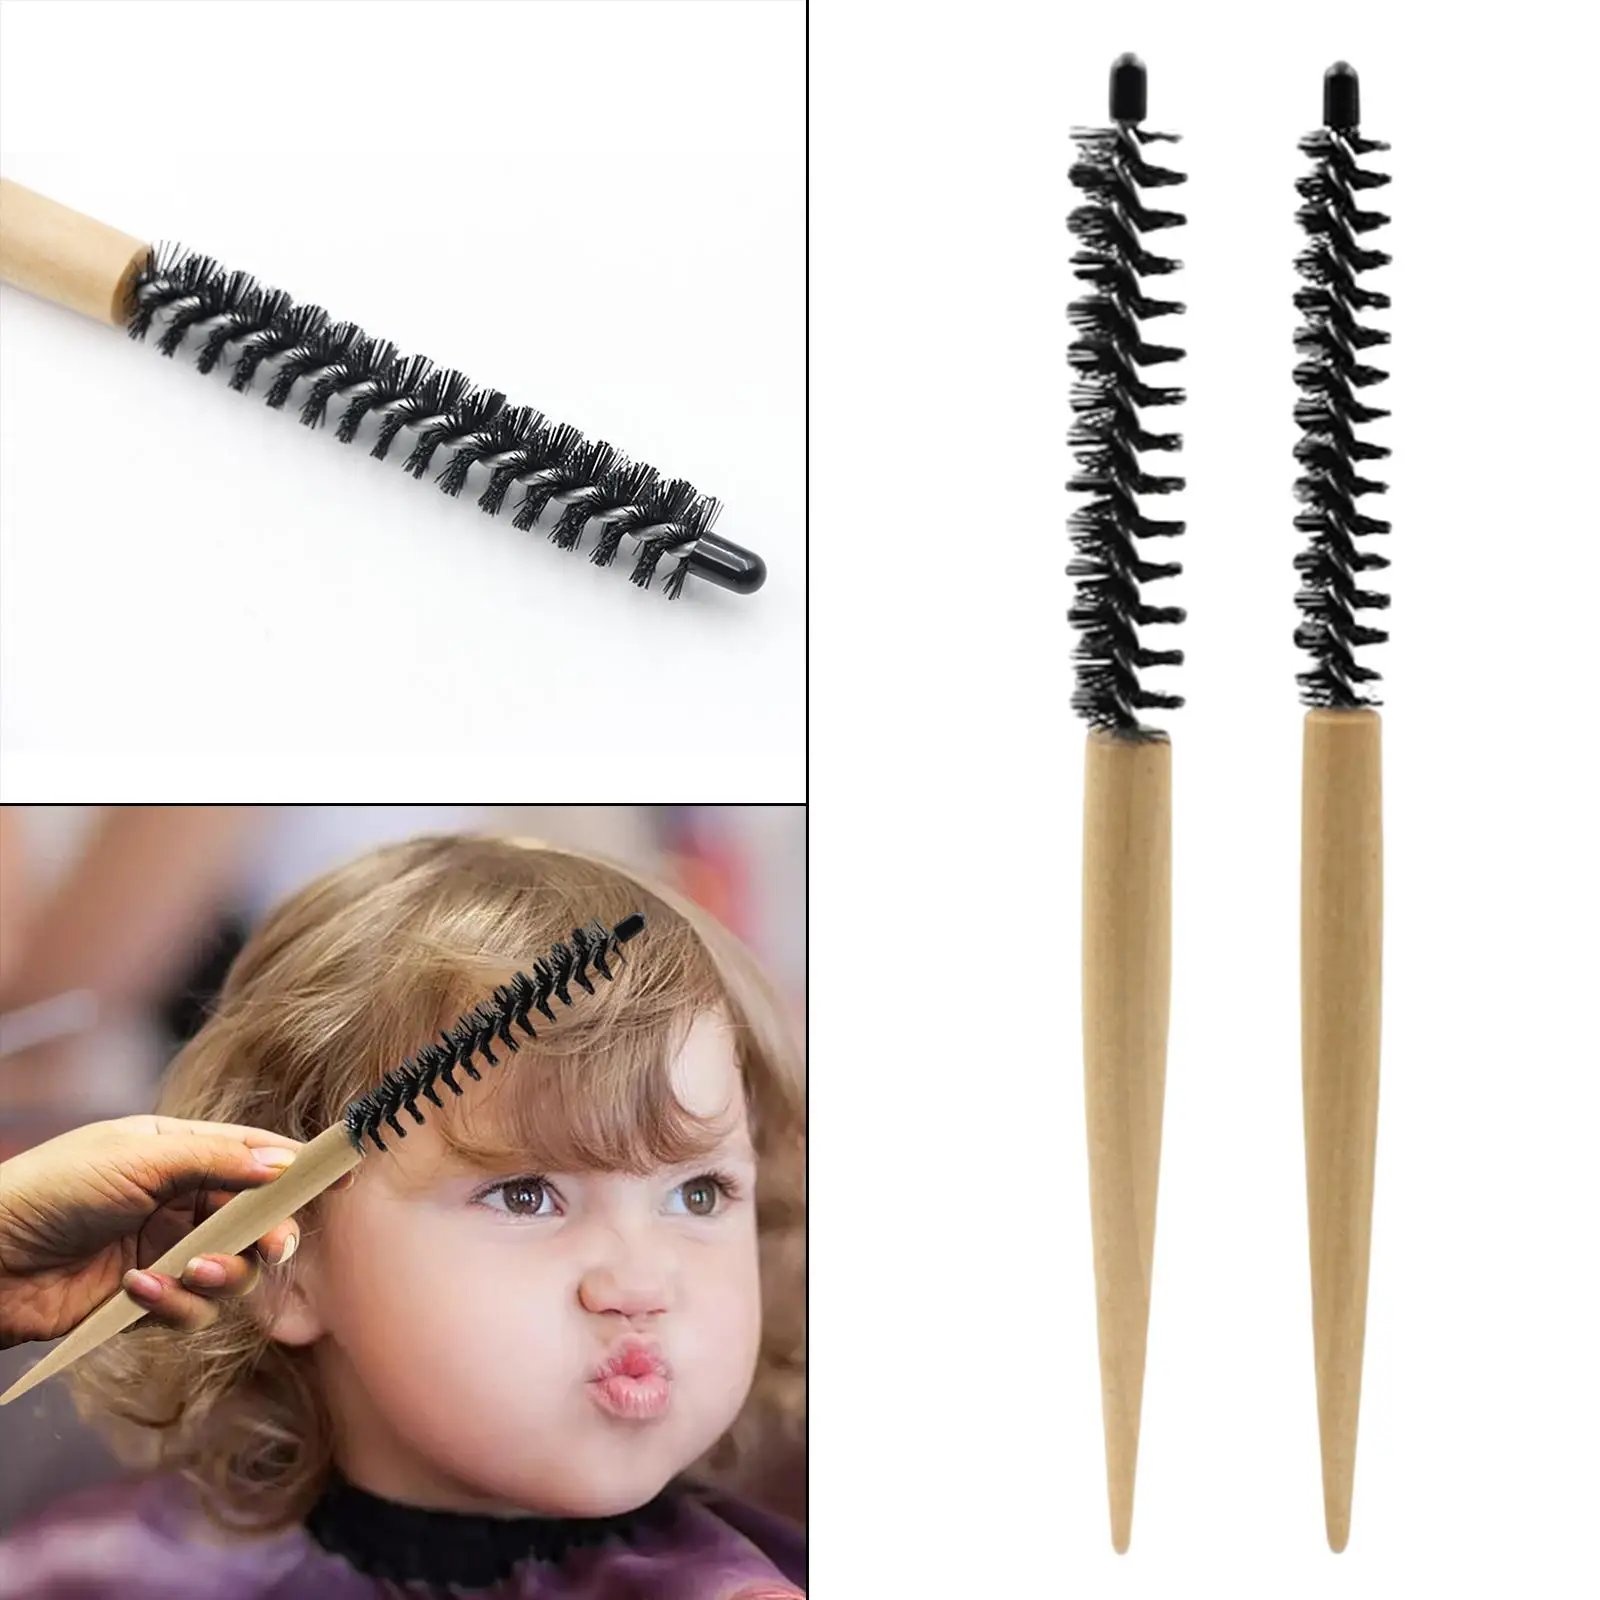 Small Round Hair Brush Mini Round Comb Salon Hairdressing Brush Roller Comb for Curly Blow Drying Hair Styling Beard Women Men